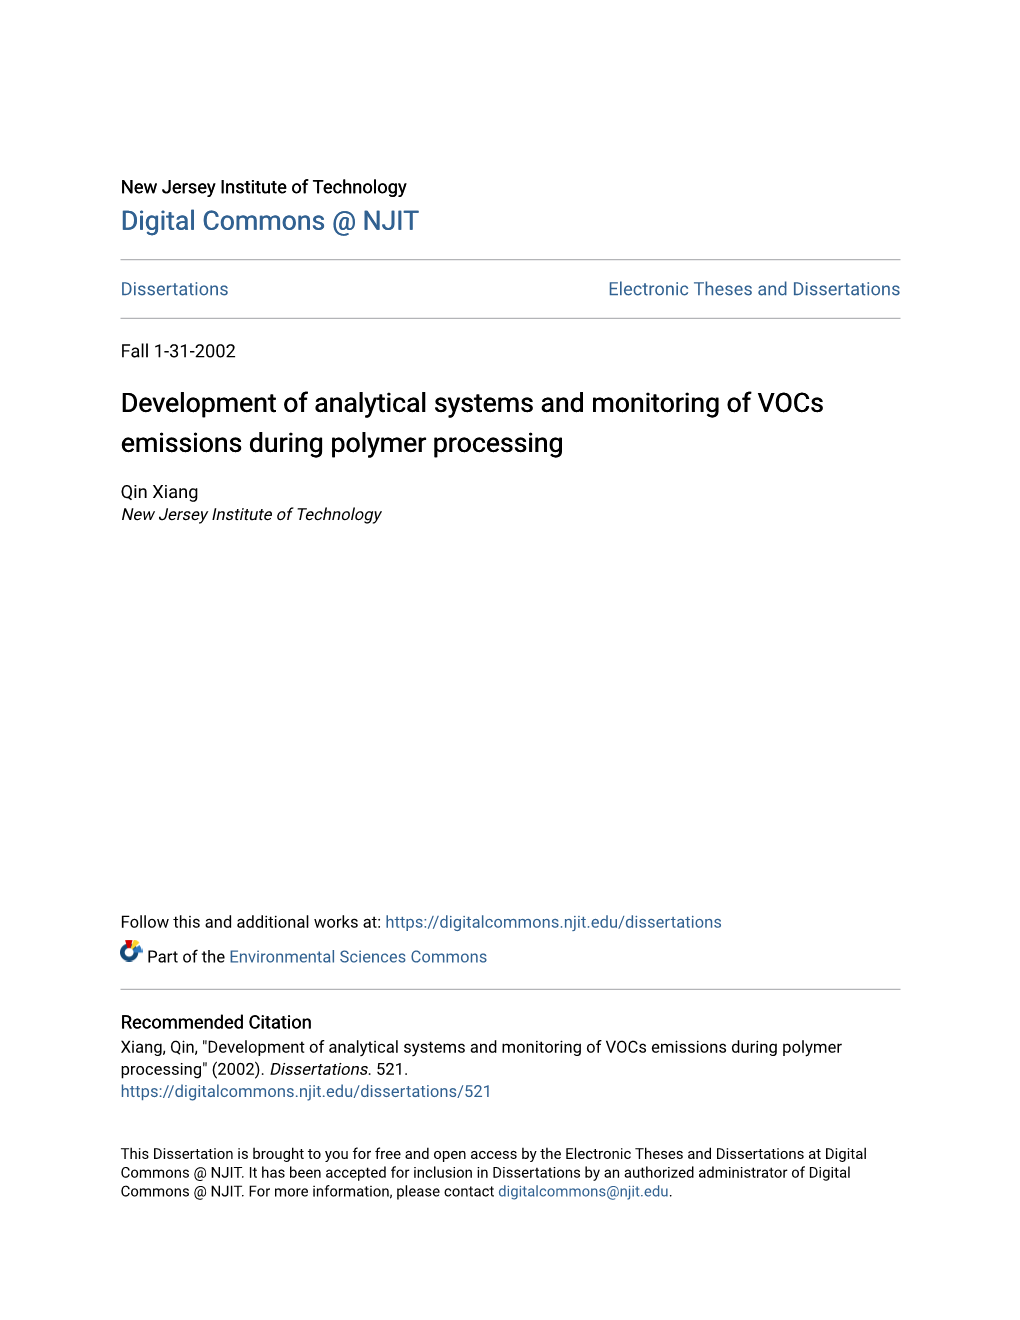 Development of Analytical Systems and Monitoring of Vocs Emissions During Polymer Processing